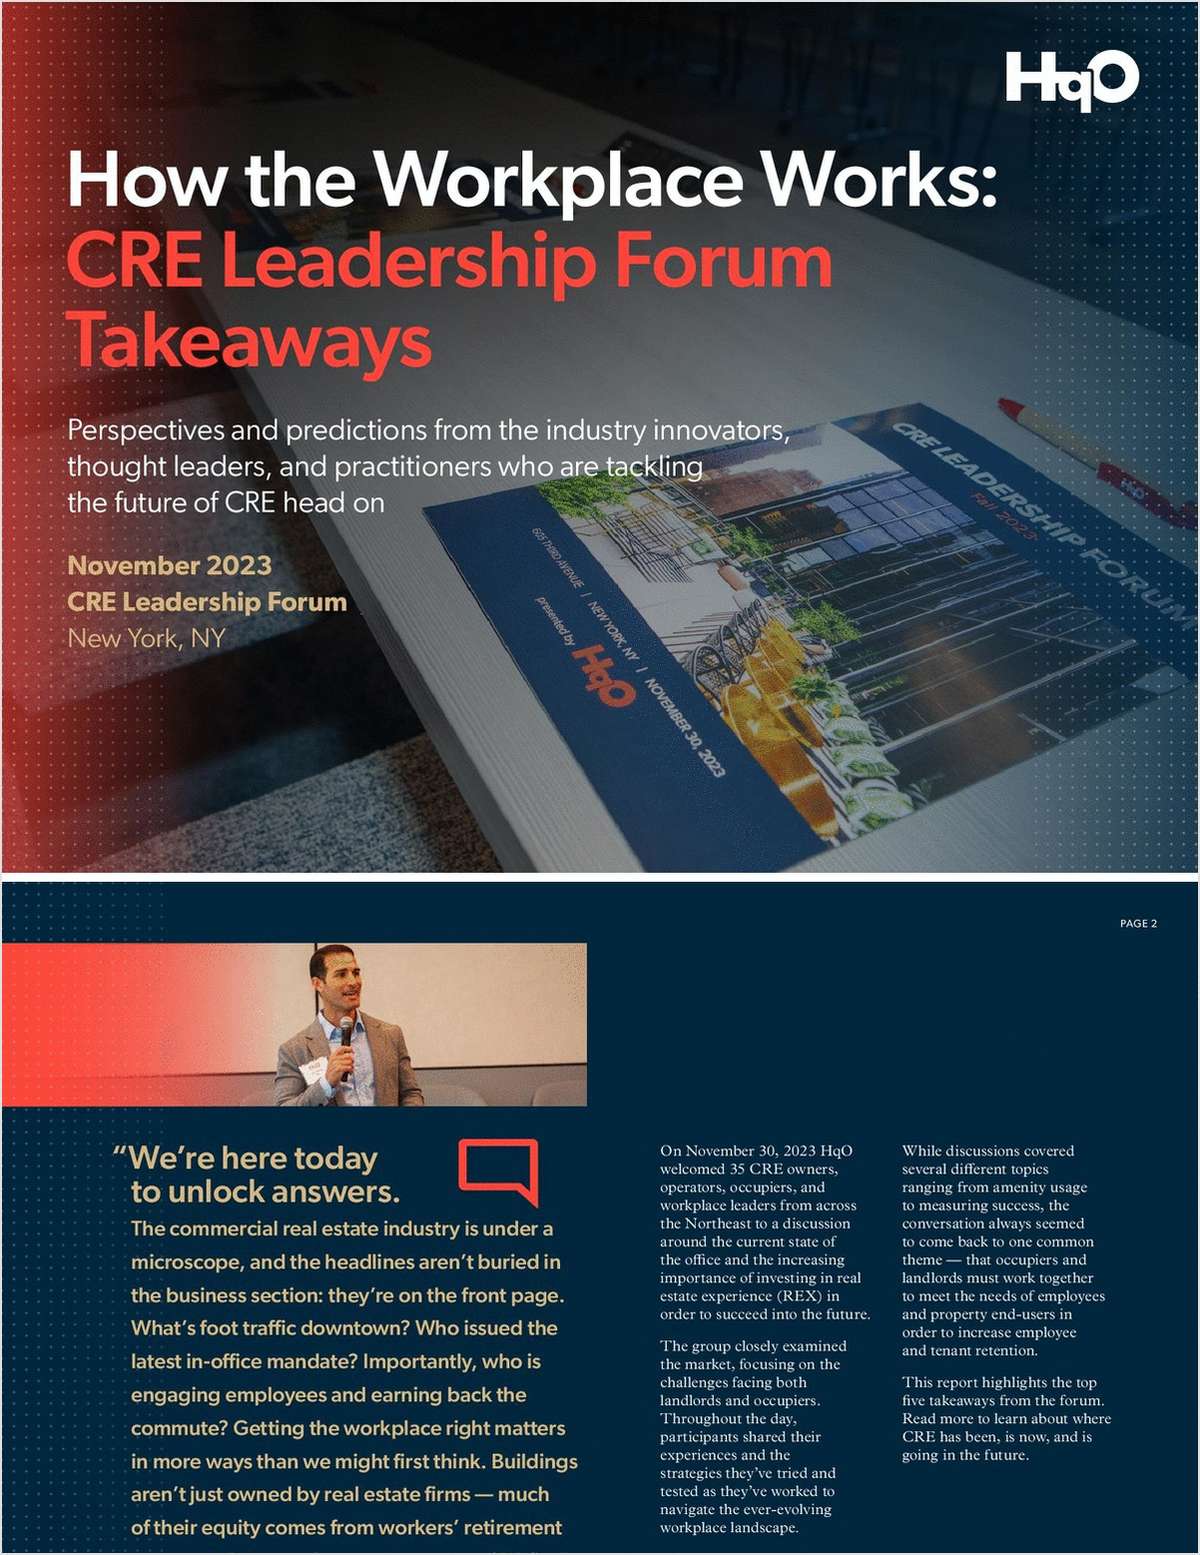 How the Workplace Works: CRE Leadership Forum Takeaways link